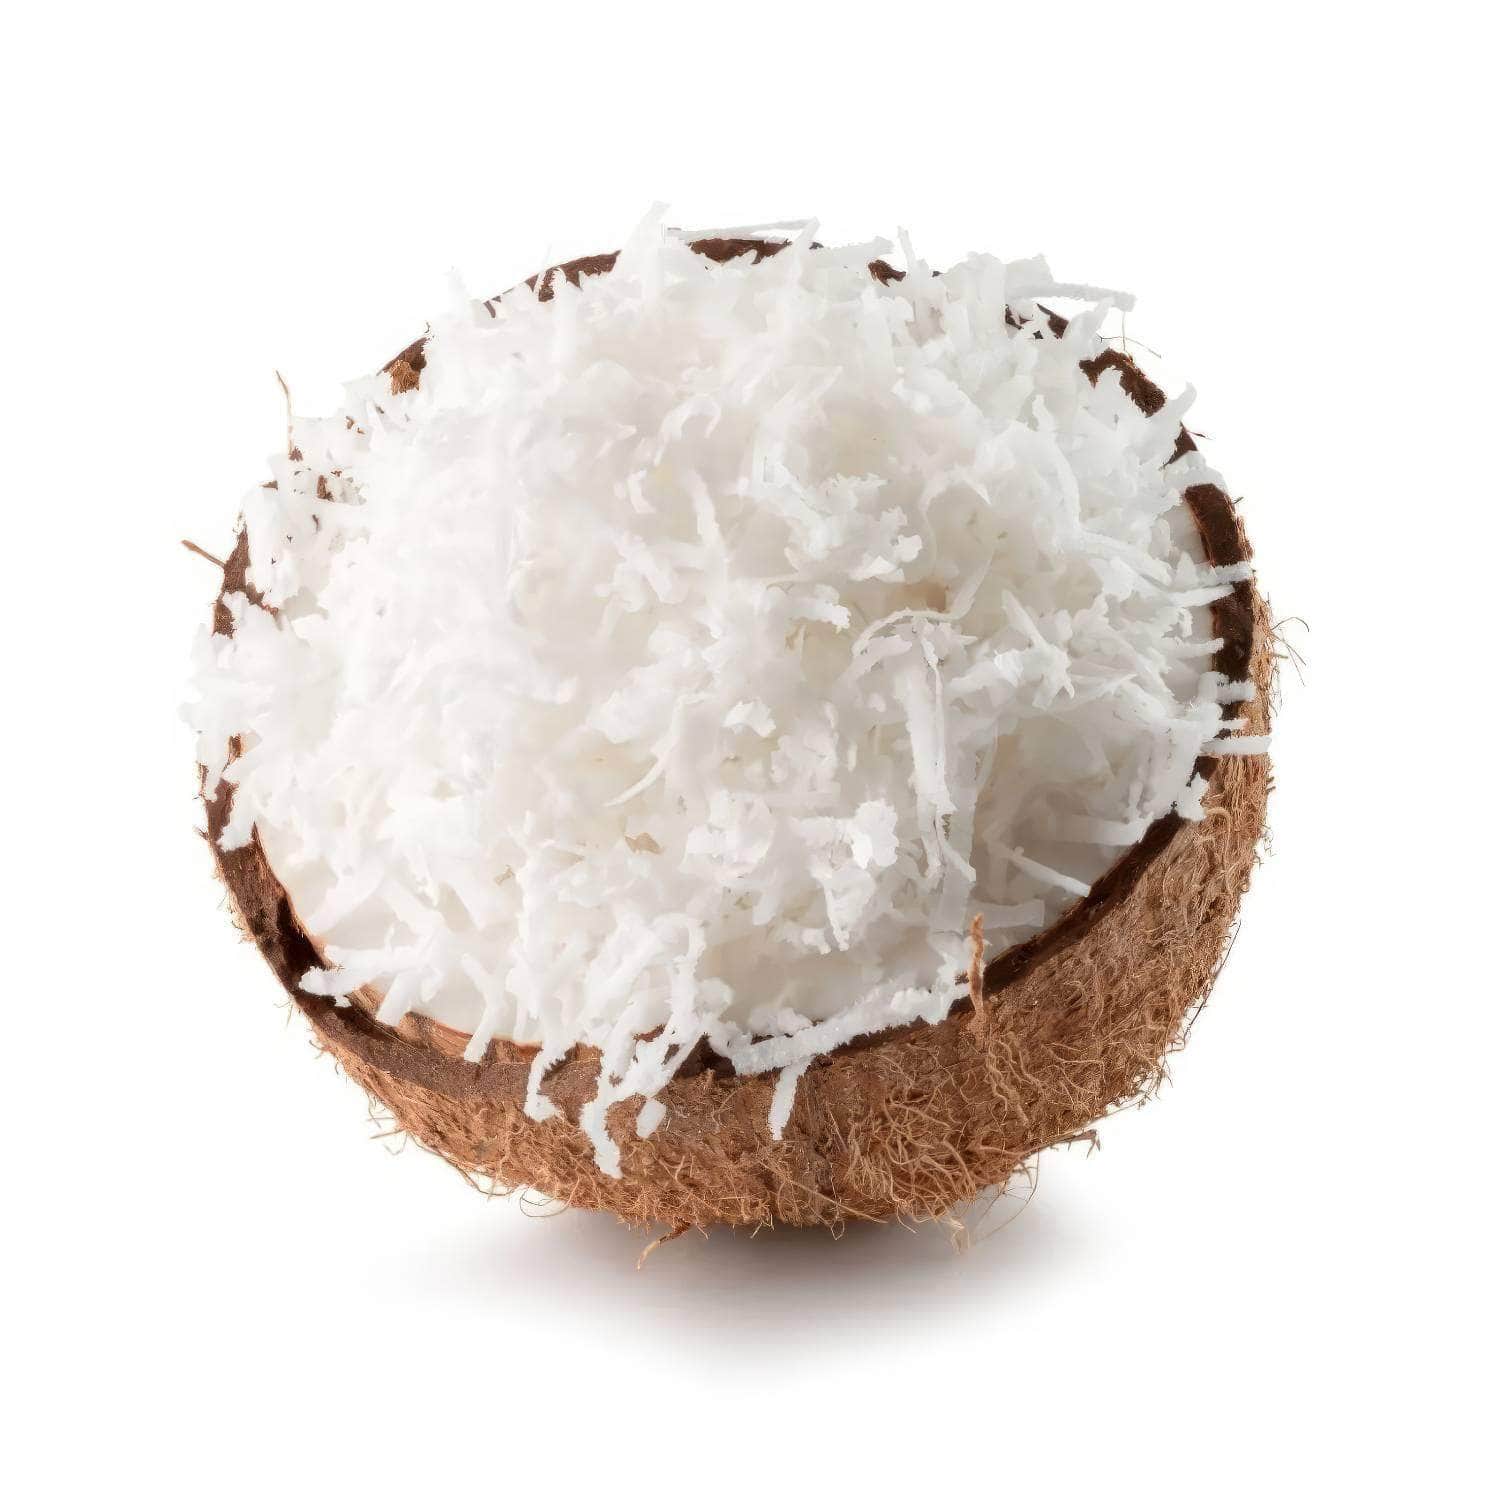 AKARZ™ Coconut Cocos Oil - Natural Aromatherapy for High-Capacity Skin Care, Massage, and Spa - Coconut Essential Oil